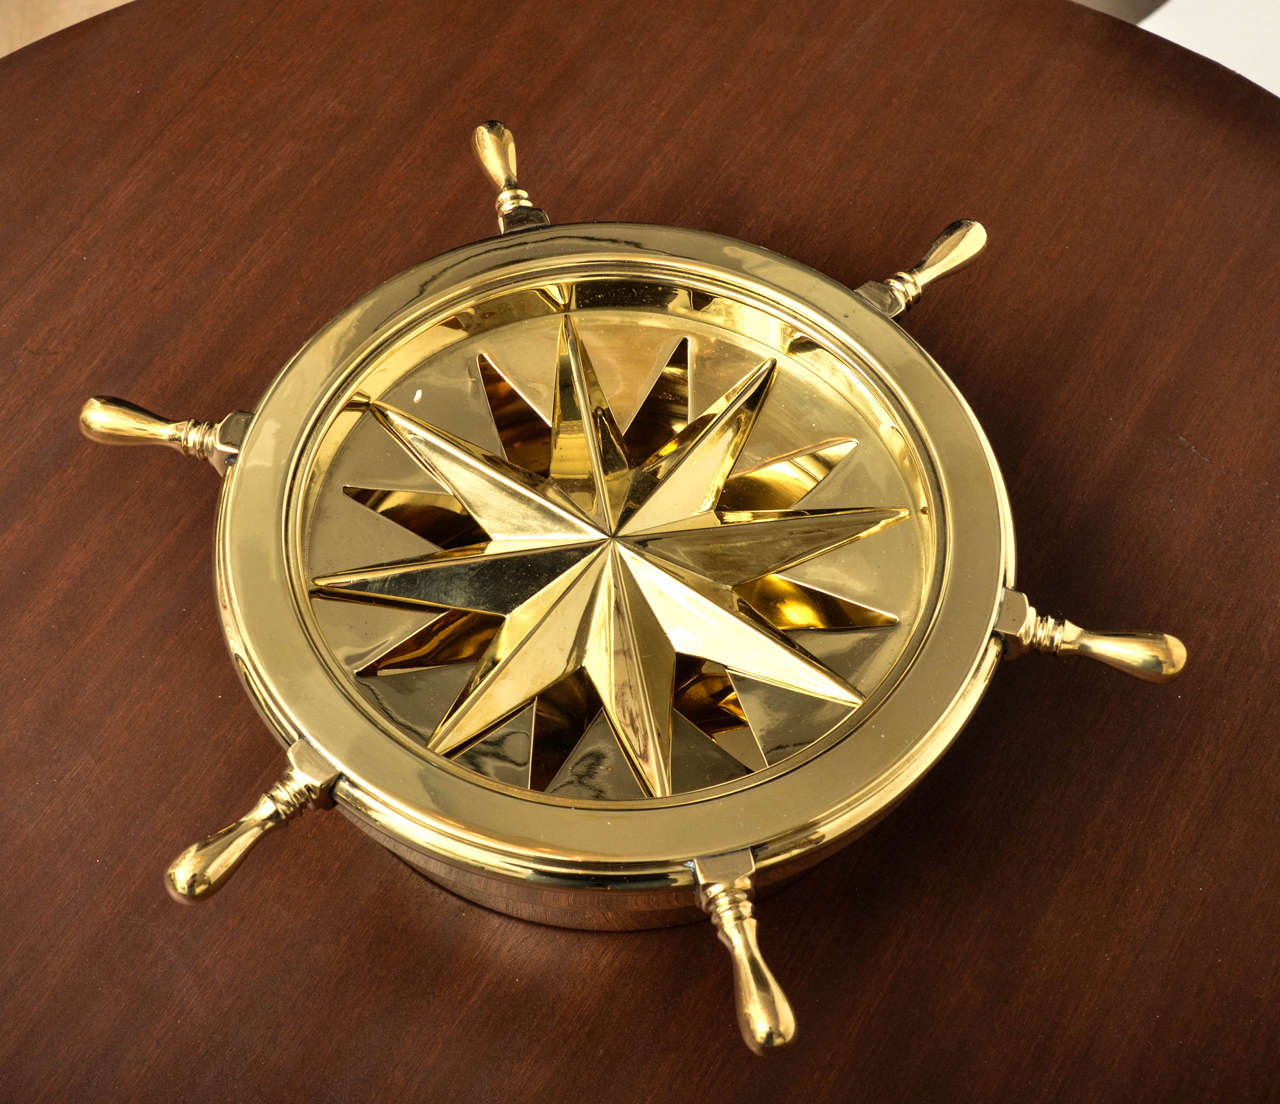 Nautical themed brass ash tray with rotating ship wheel cover and star form center.